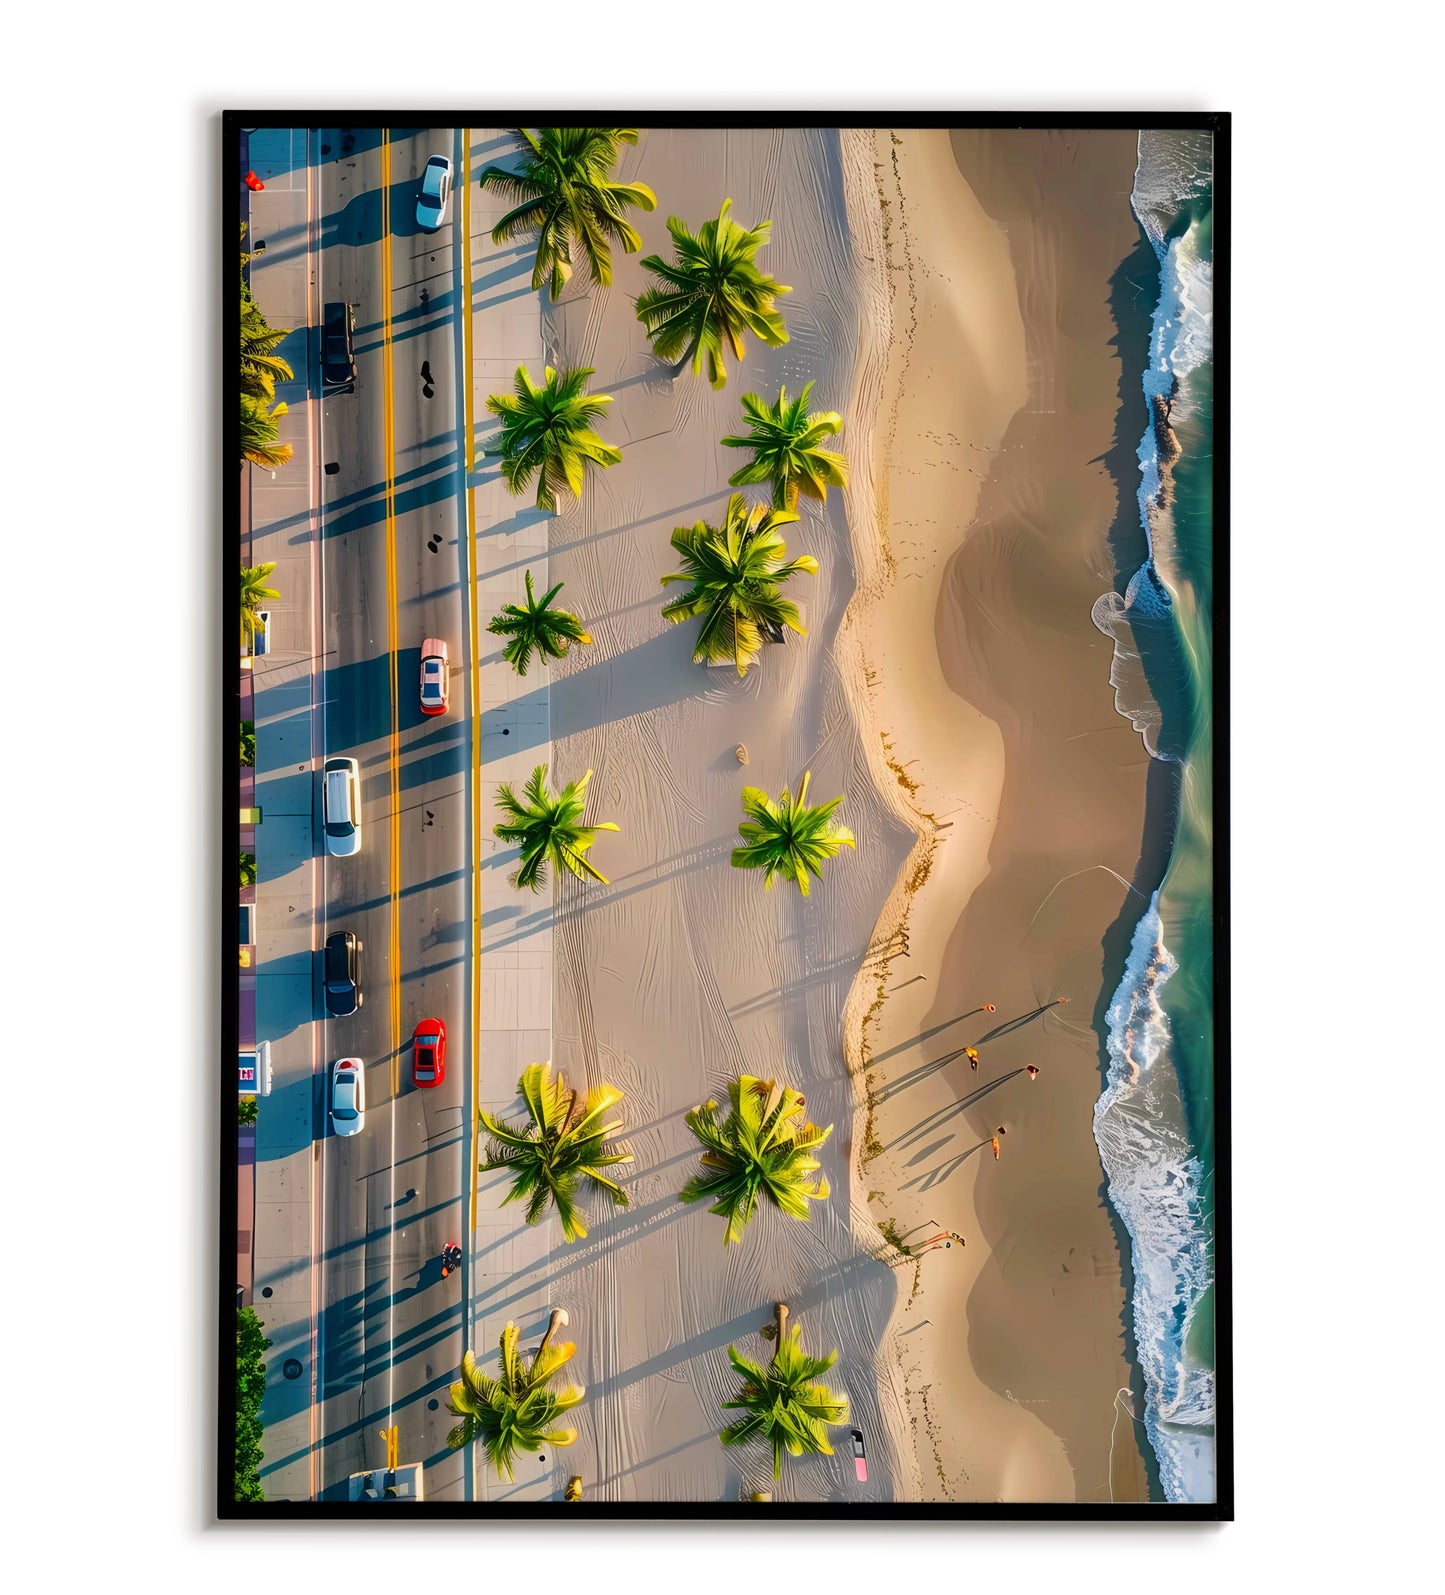 Miami Shoreline printable poster. Available for purchase as a physical poster or digital download.